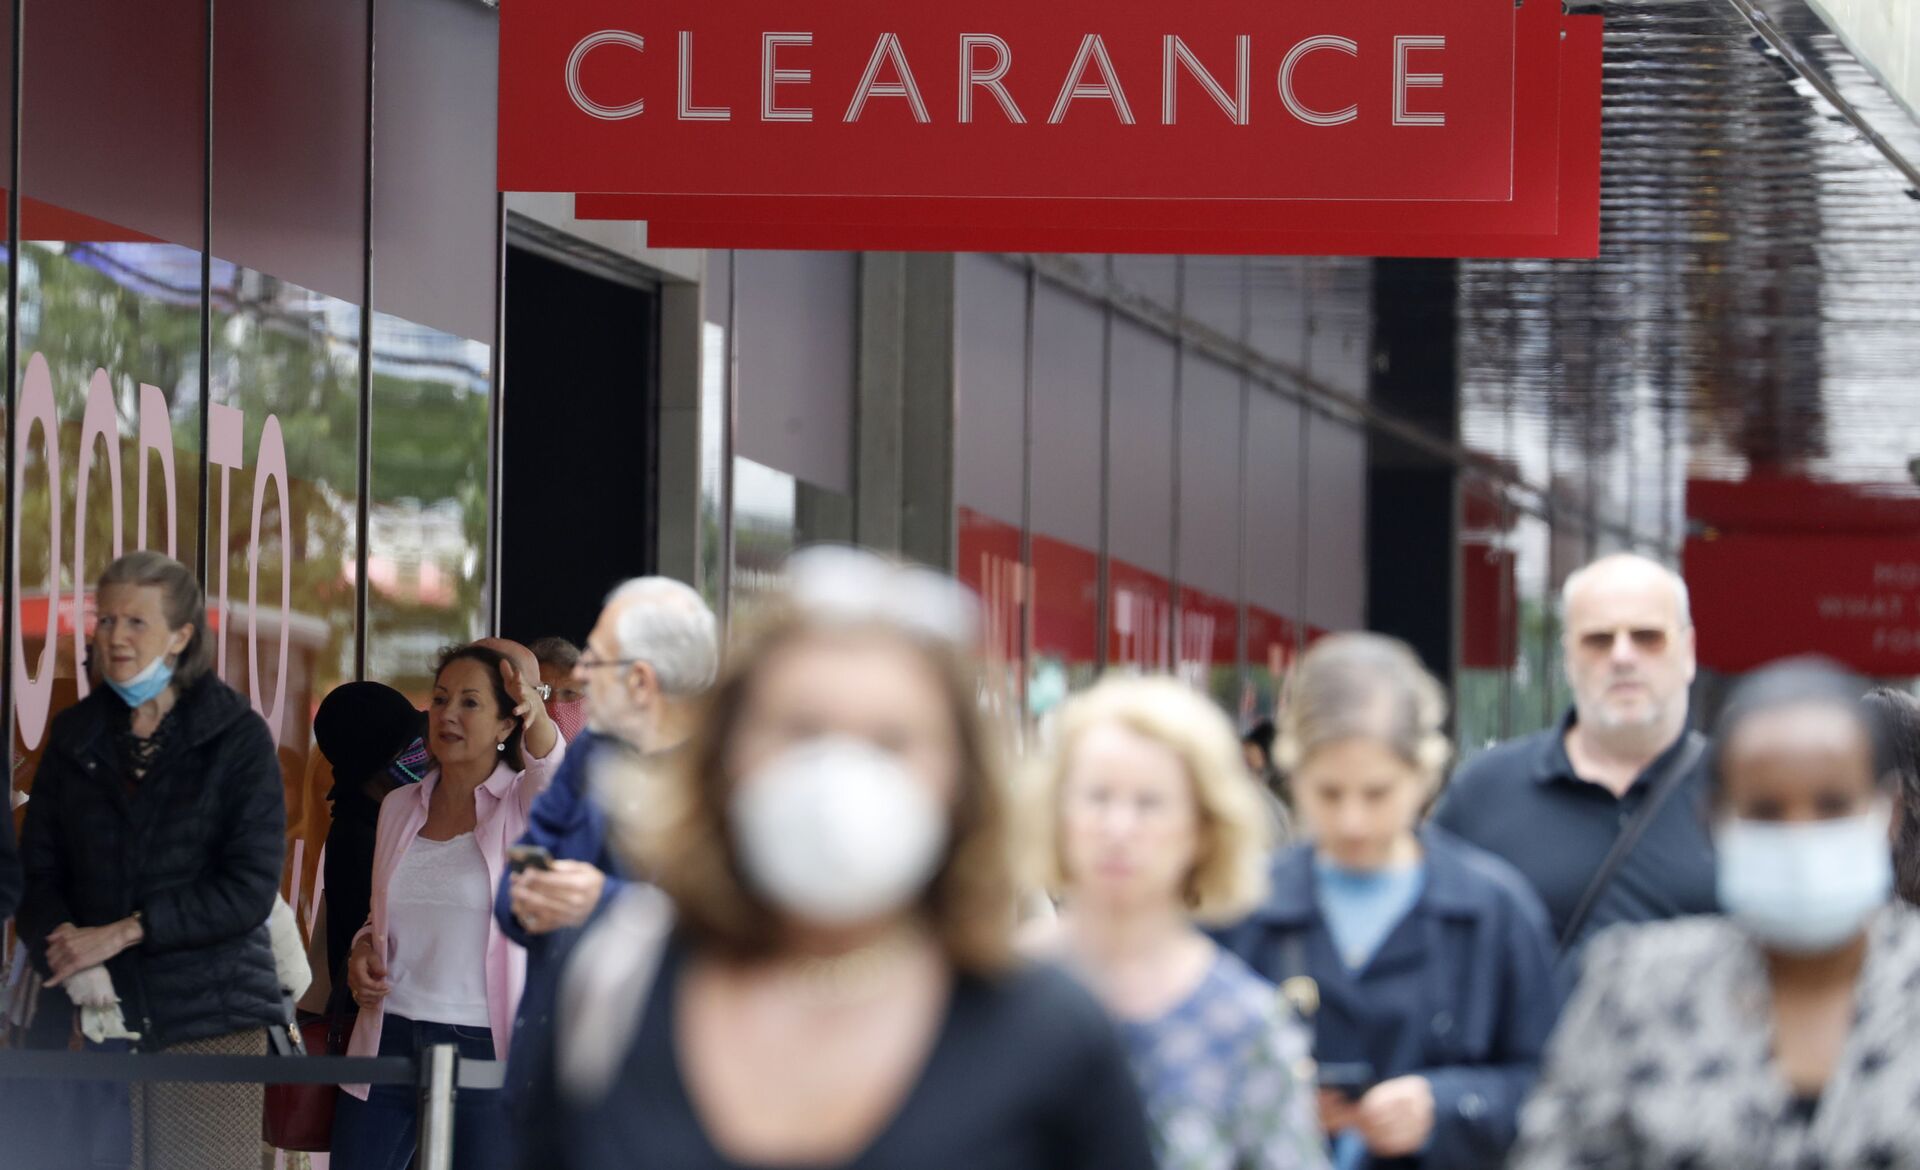 People, some wearing masks queue outside a John Lewis store, in London, Thursday, July 16, 2020. Unemployment across the U.K. has held steady during the coronavirus lockdown as a result of a government salary support scheme, but there are clear signals emerging that job losses will skyrocket over coming months - Sputnik International, 1920, 08.10.2021